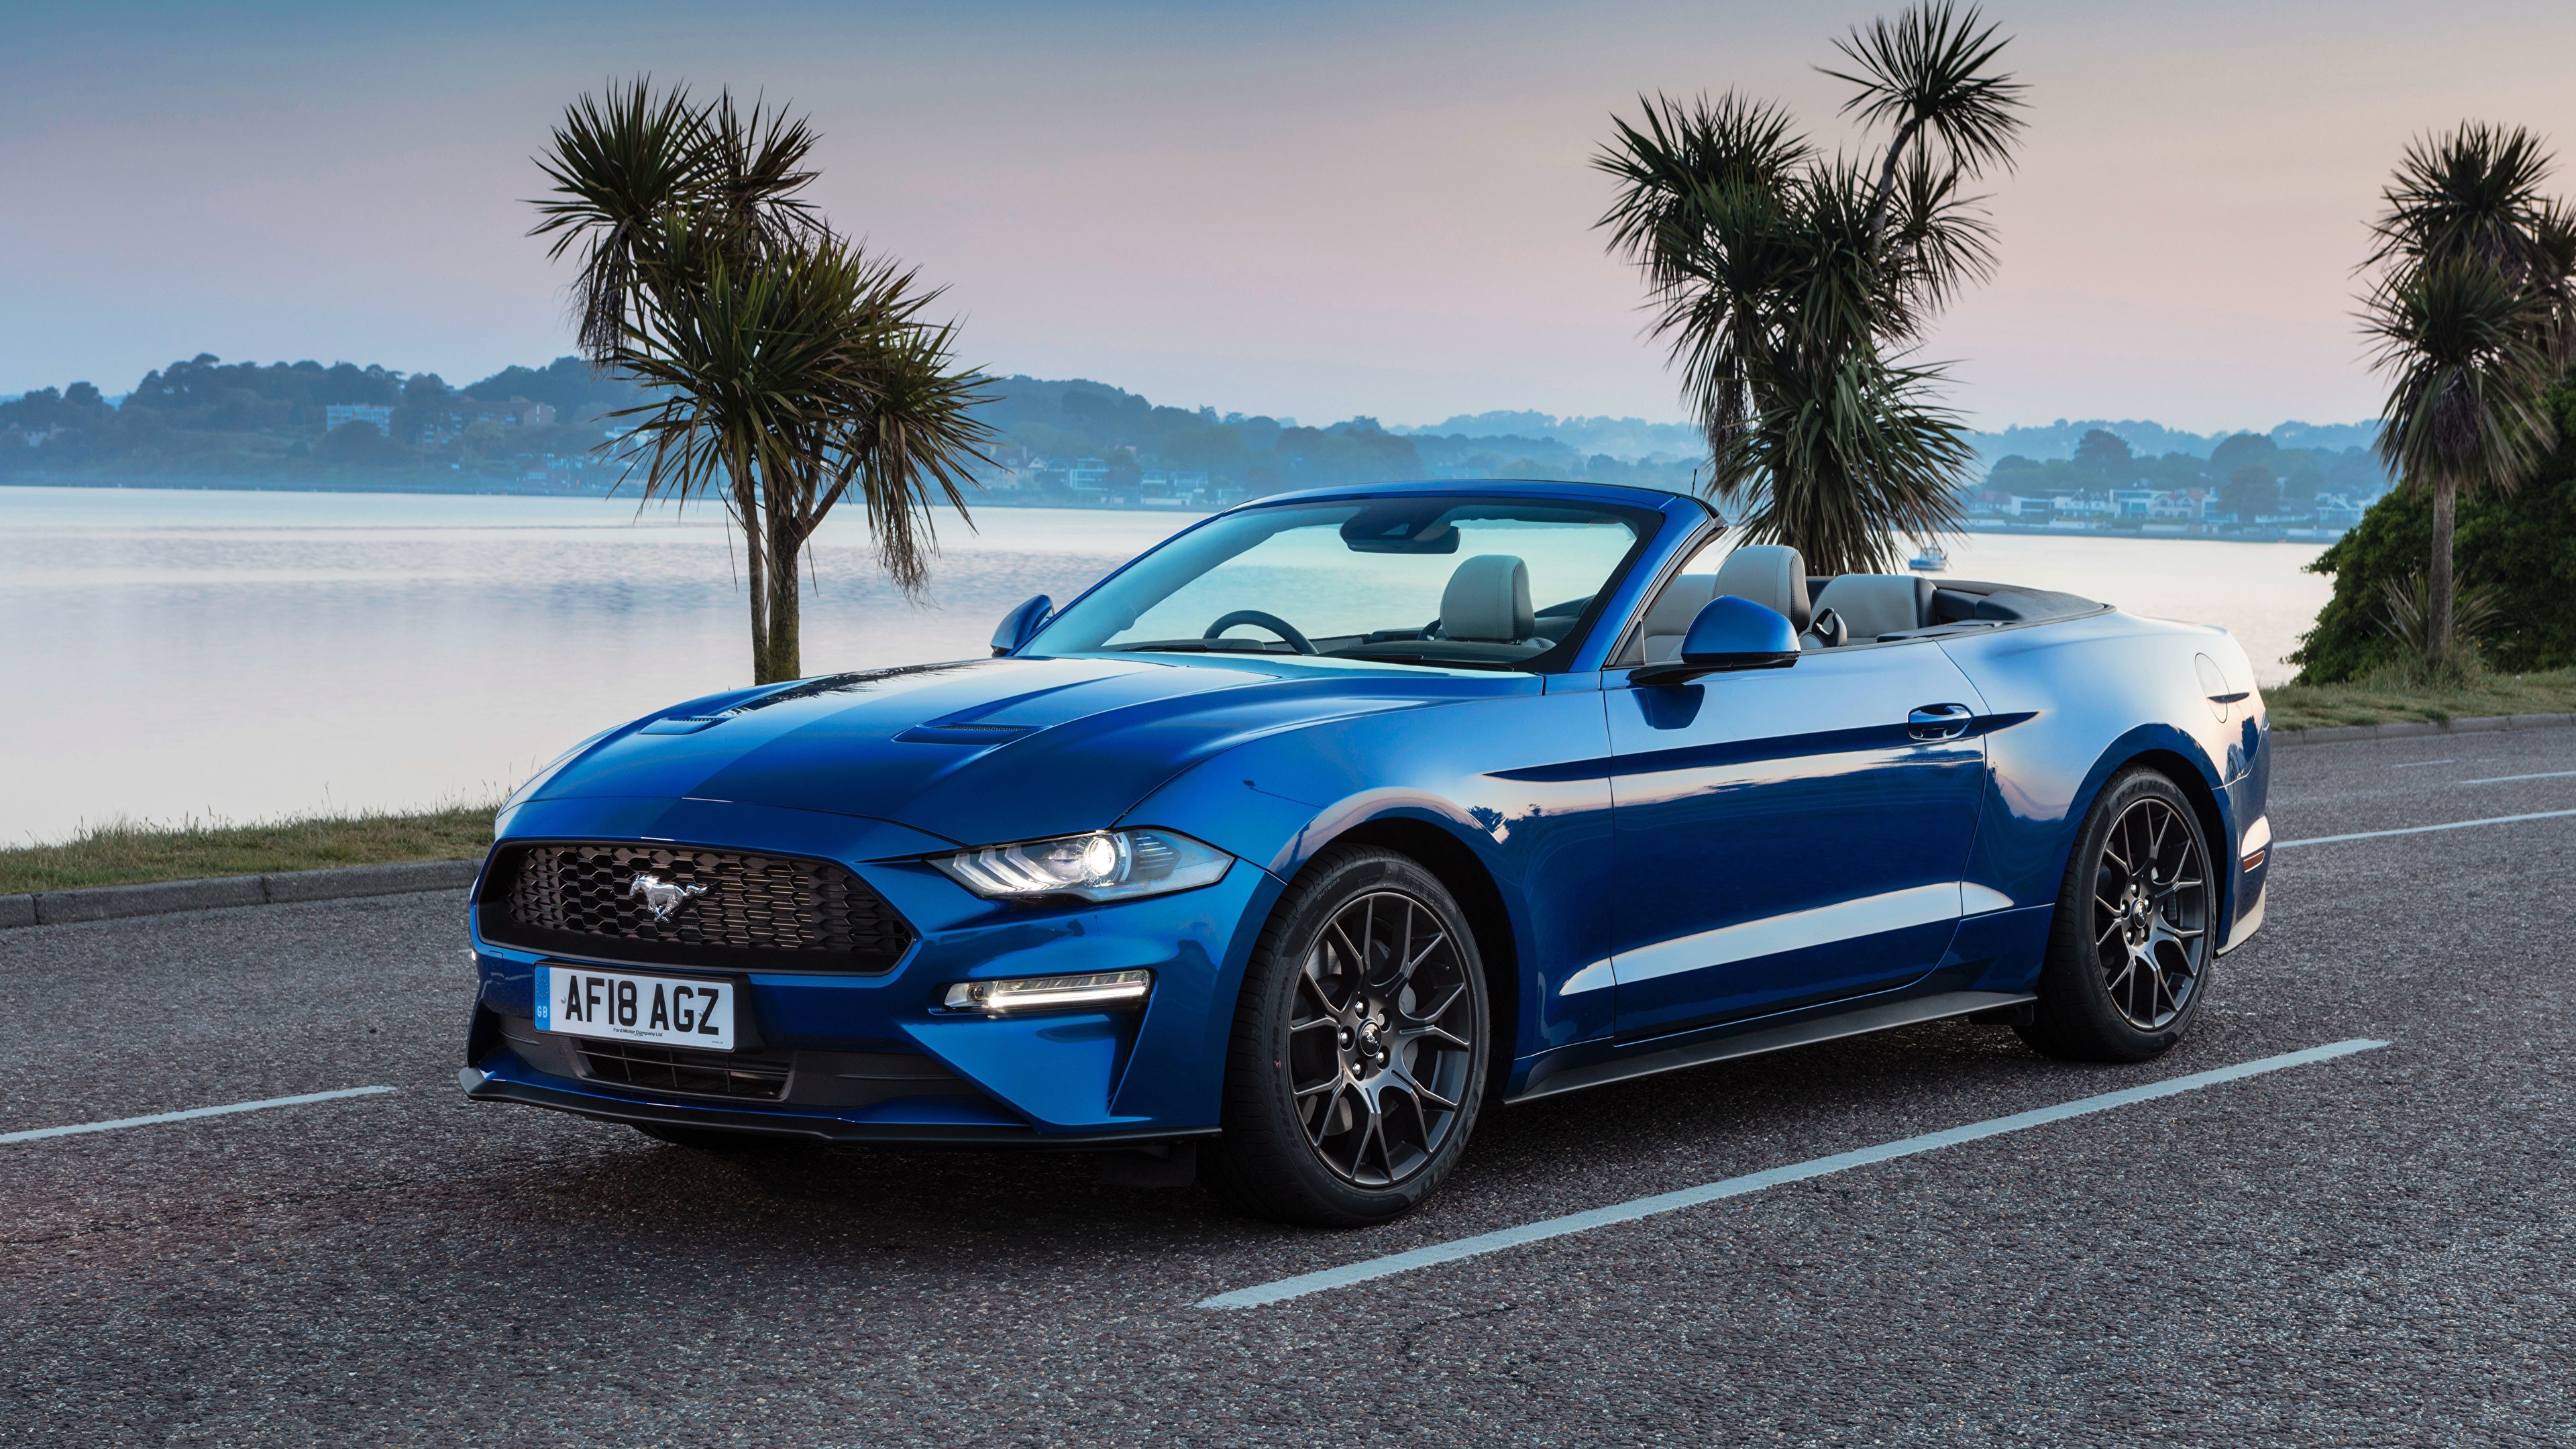 Papeis de parede 3840x2160 Ford Mustang 2018 Ecoboost Convertible Azul